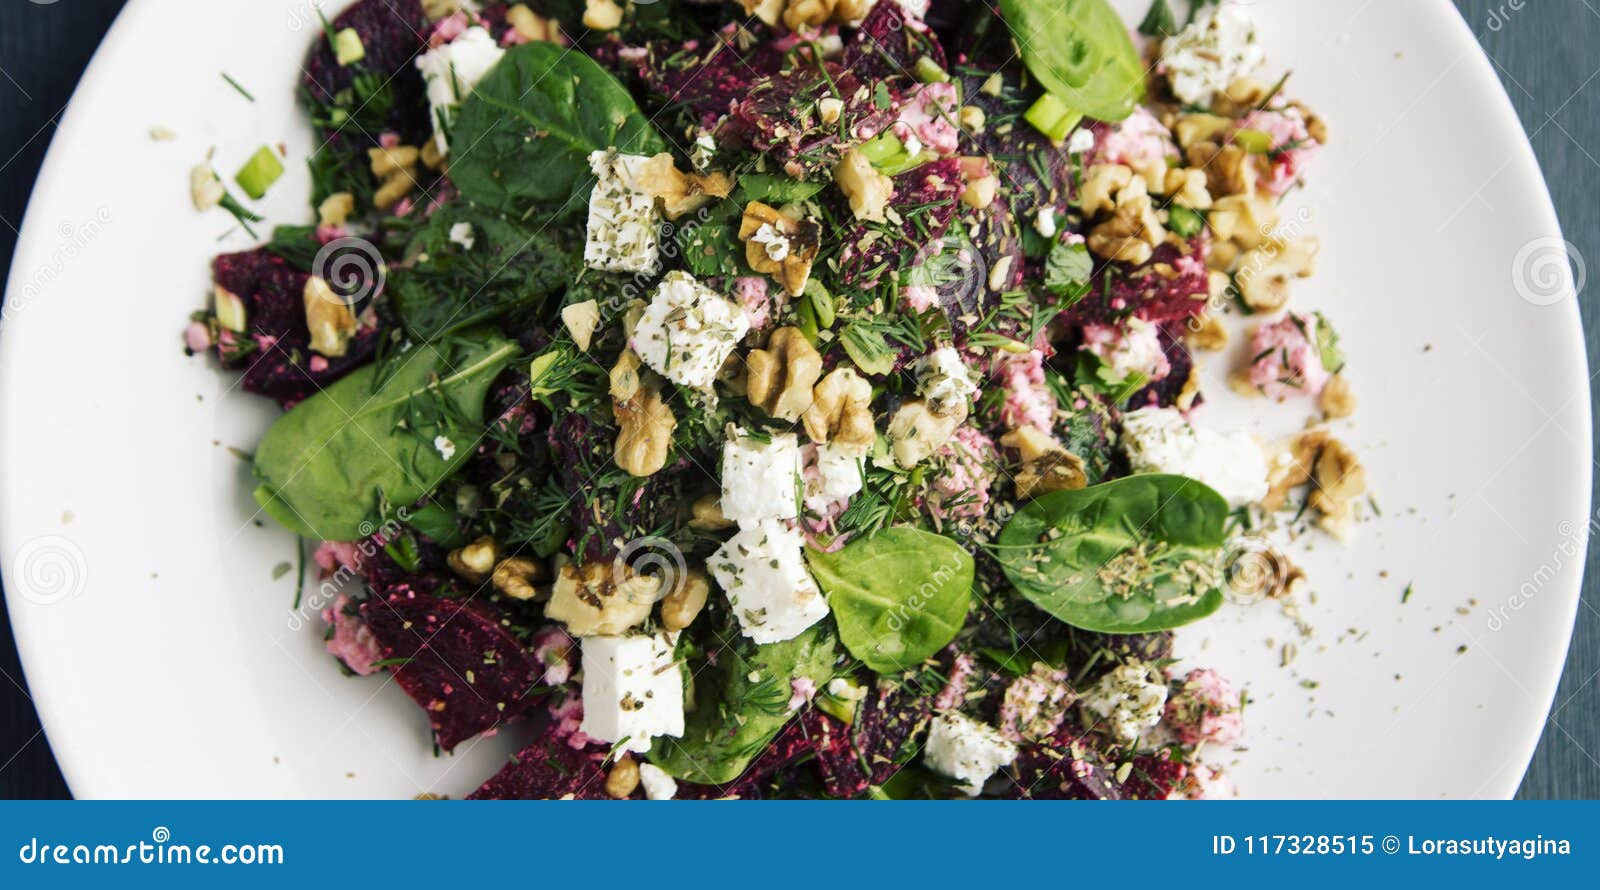 Cottage Cheese And Baby Spinach Vegetarian Salad Stock Image